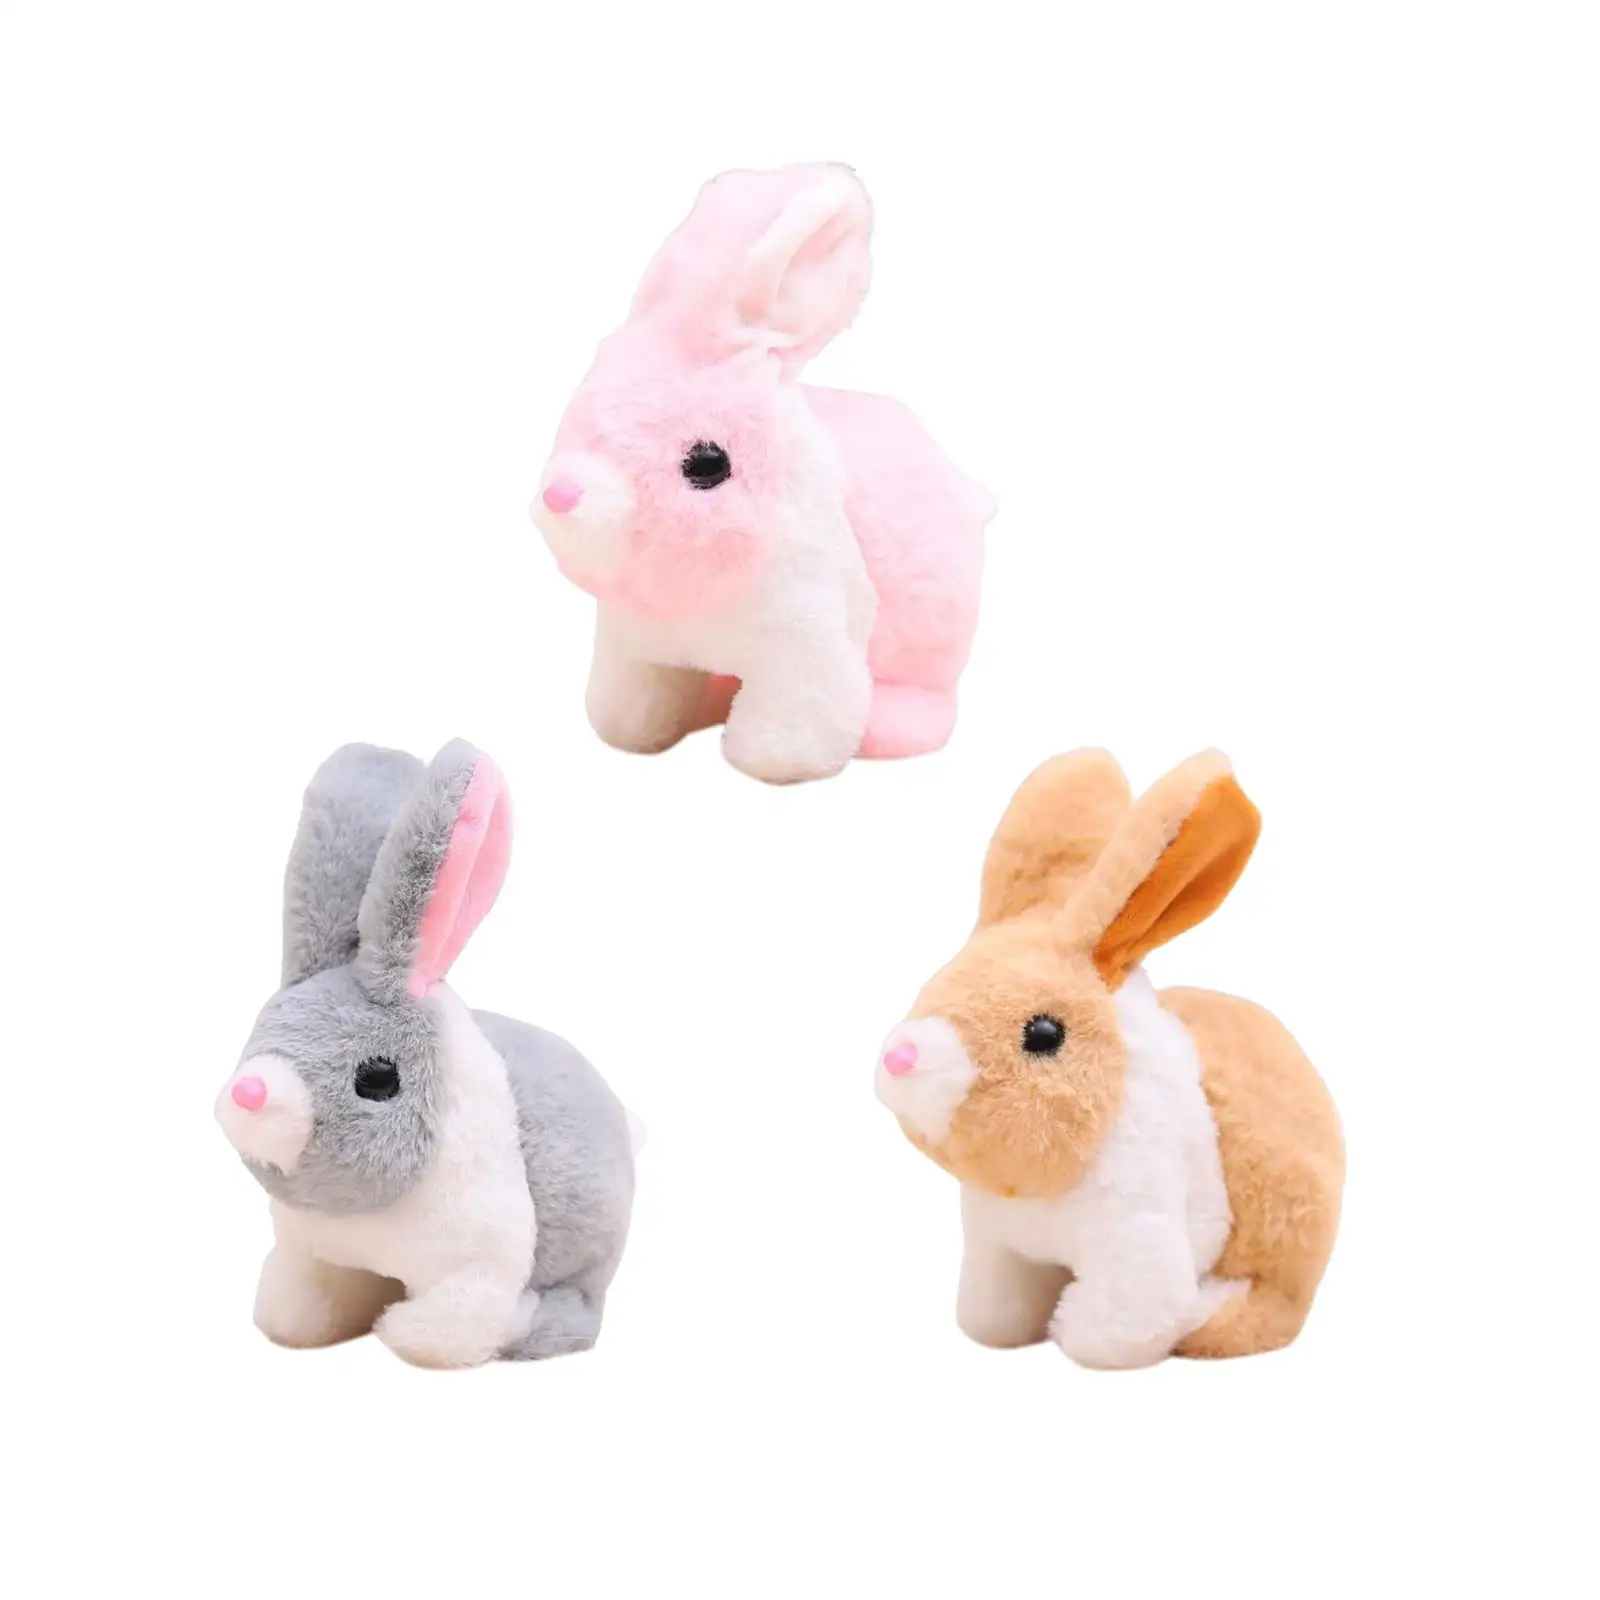 Electric Rabbit Toys Plush Toy Educational Stuffed Animal for Party Favor